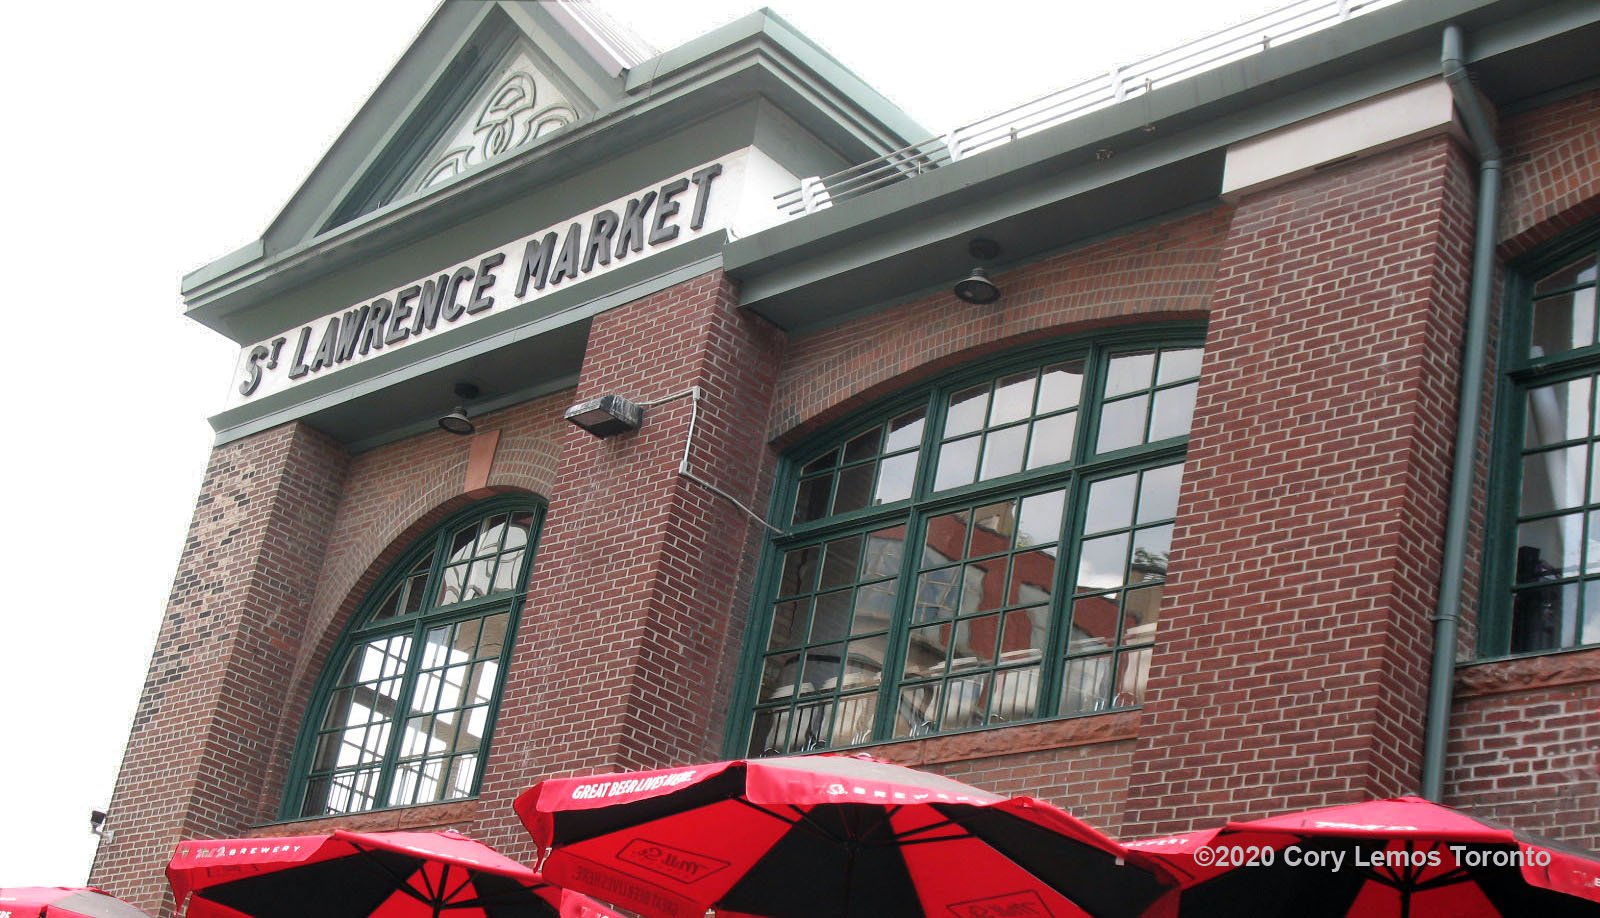 picture of St Lawrence Market